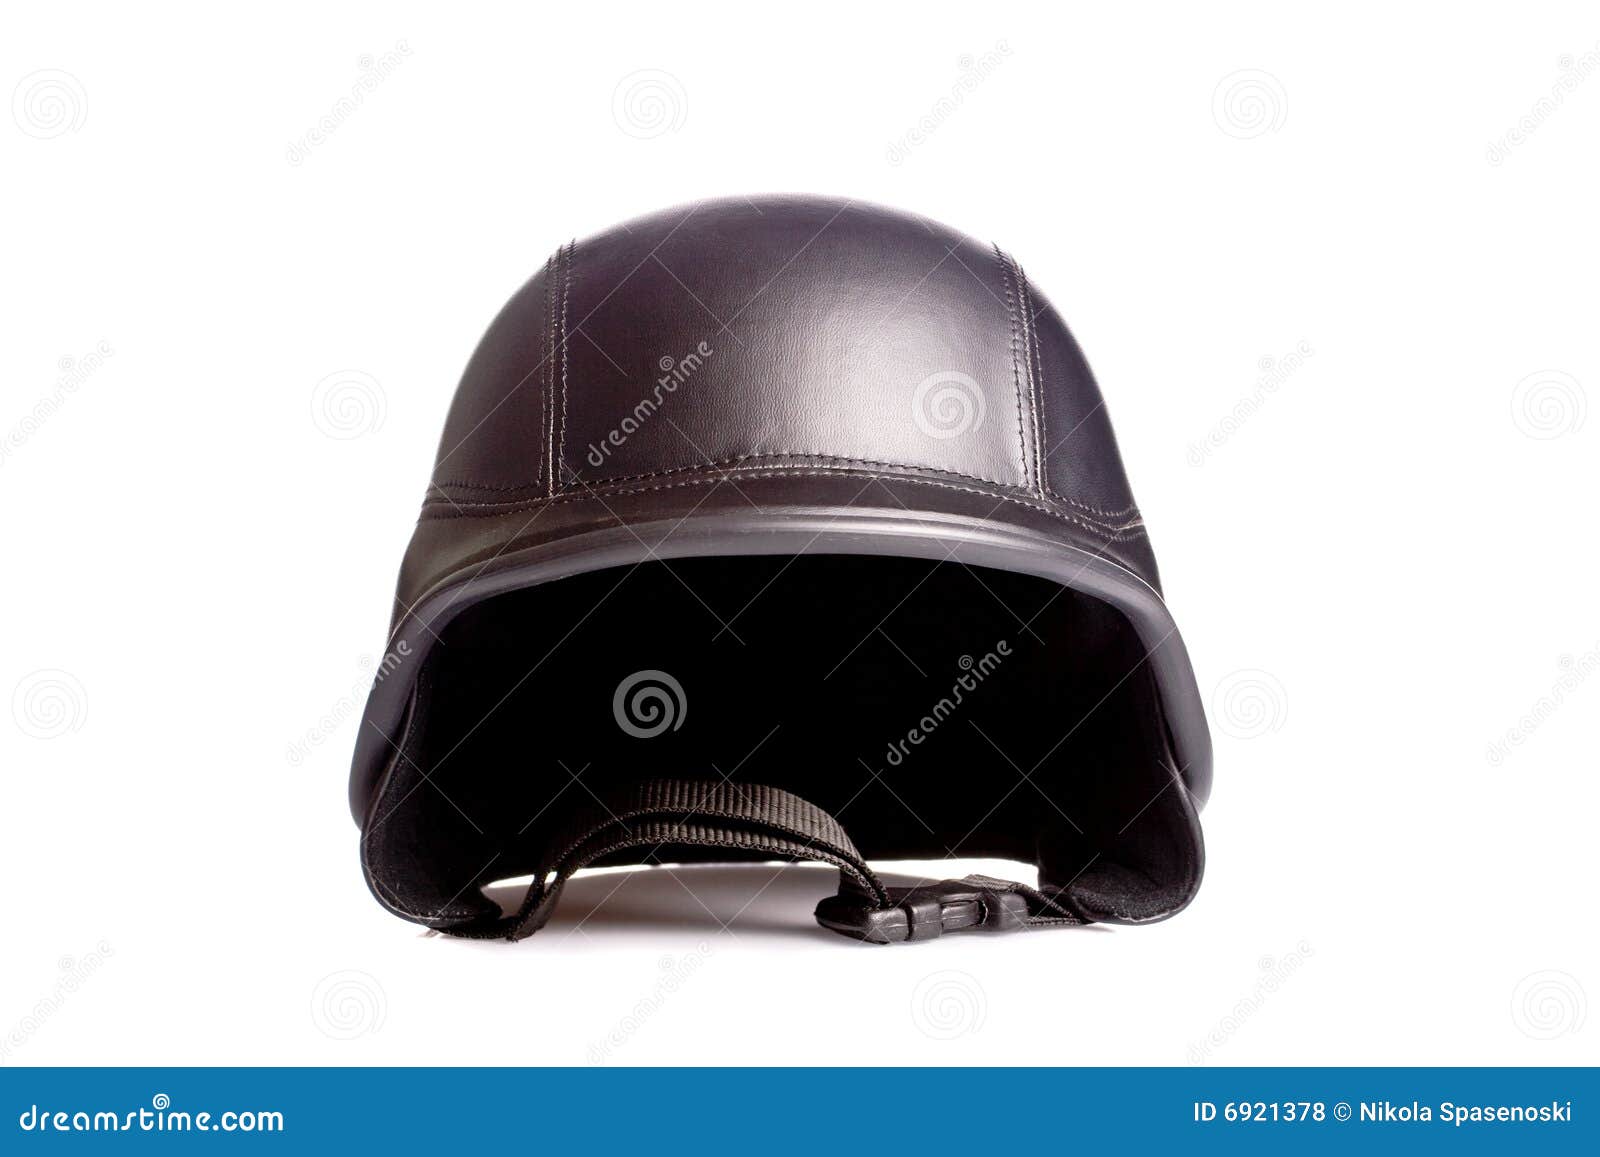 US ARMY motorcycle helmet stock photo. Image of protect - 6921378